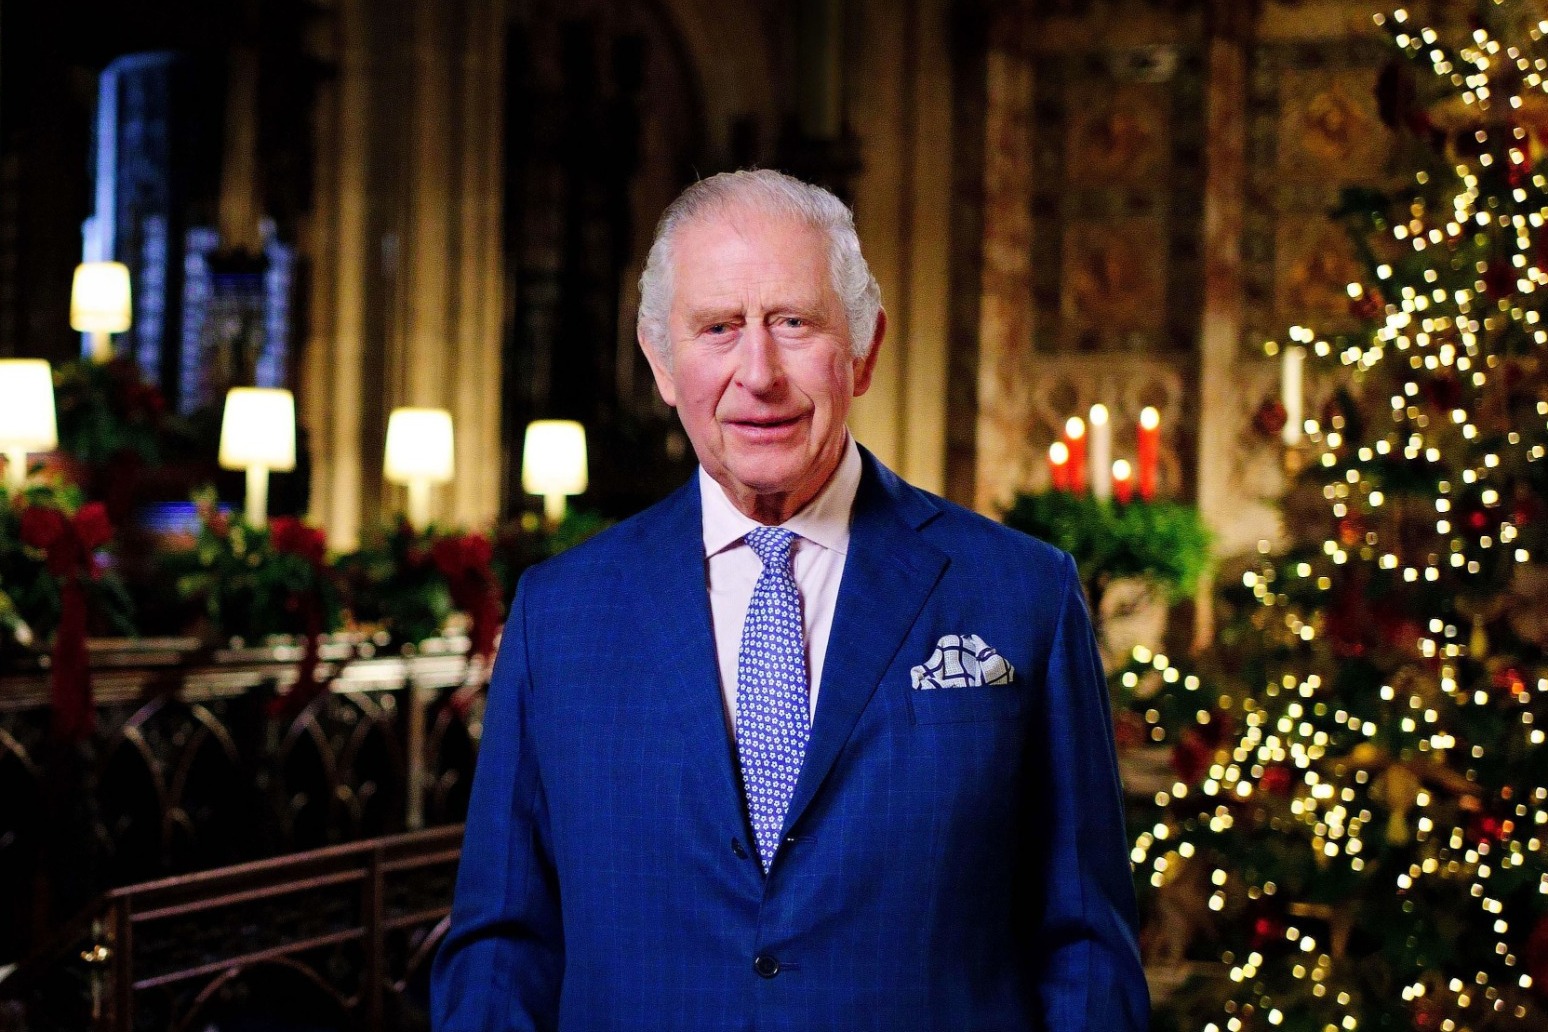 King praises ‘wonderfully kind’ people helping the needy in first Christmas broadcast 